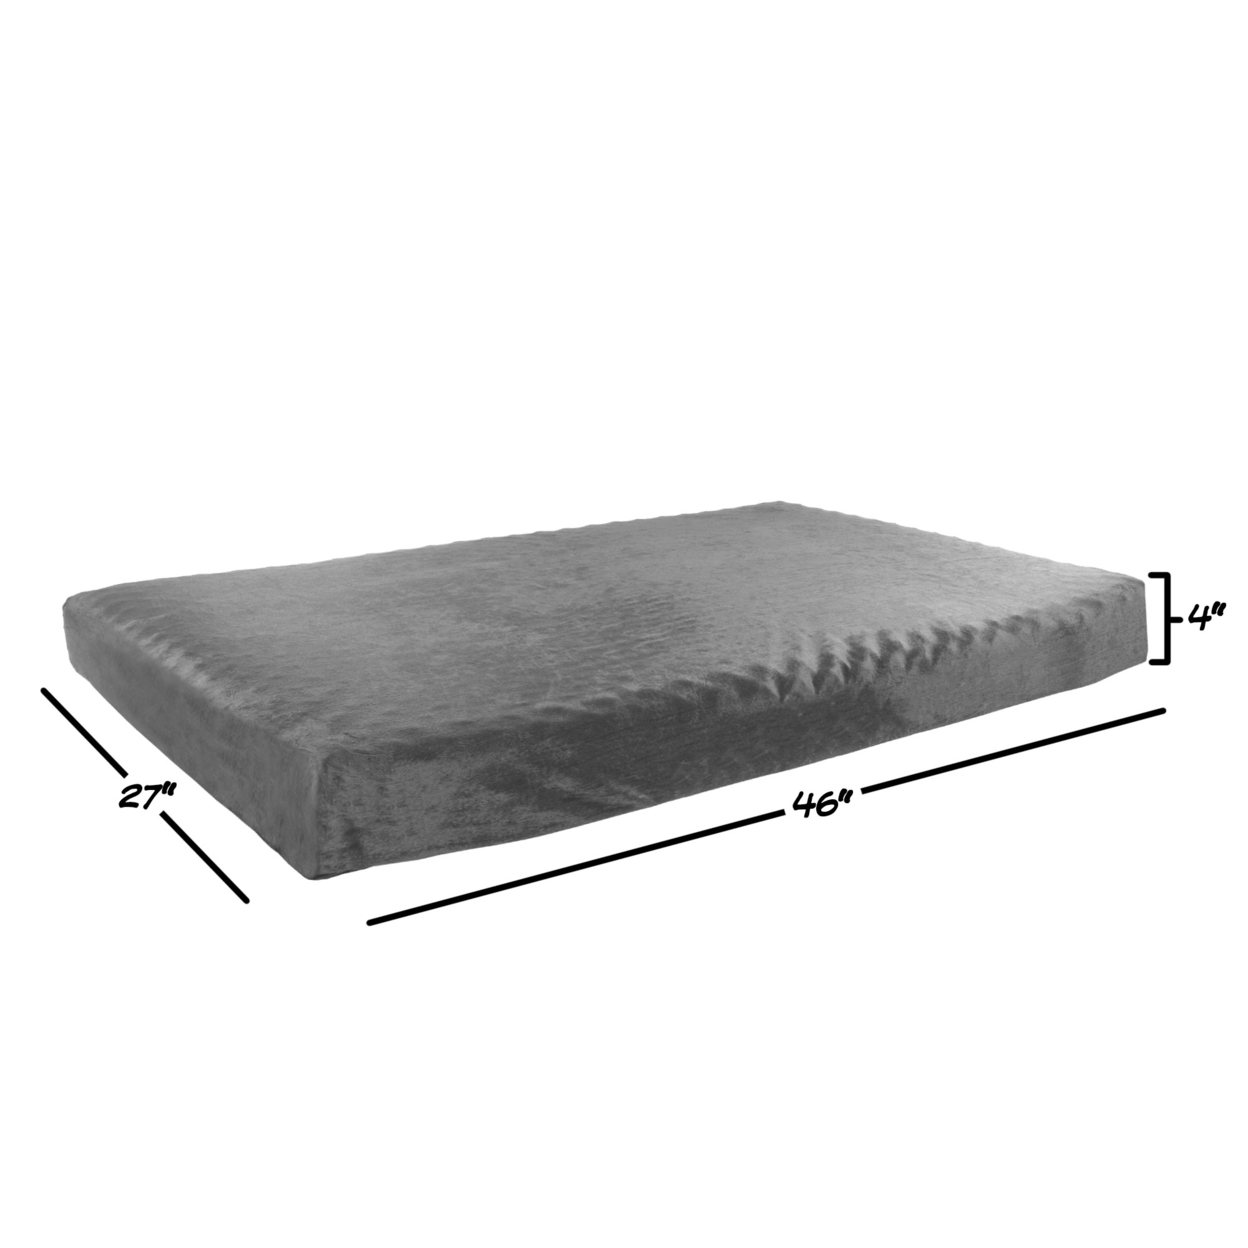 Orthopedic Pet Bed - Egg Crate And Memory Foam With Washable Cover 46x27x4 Extra Large - Gray